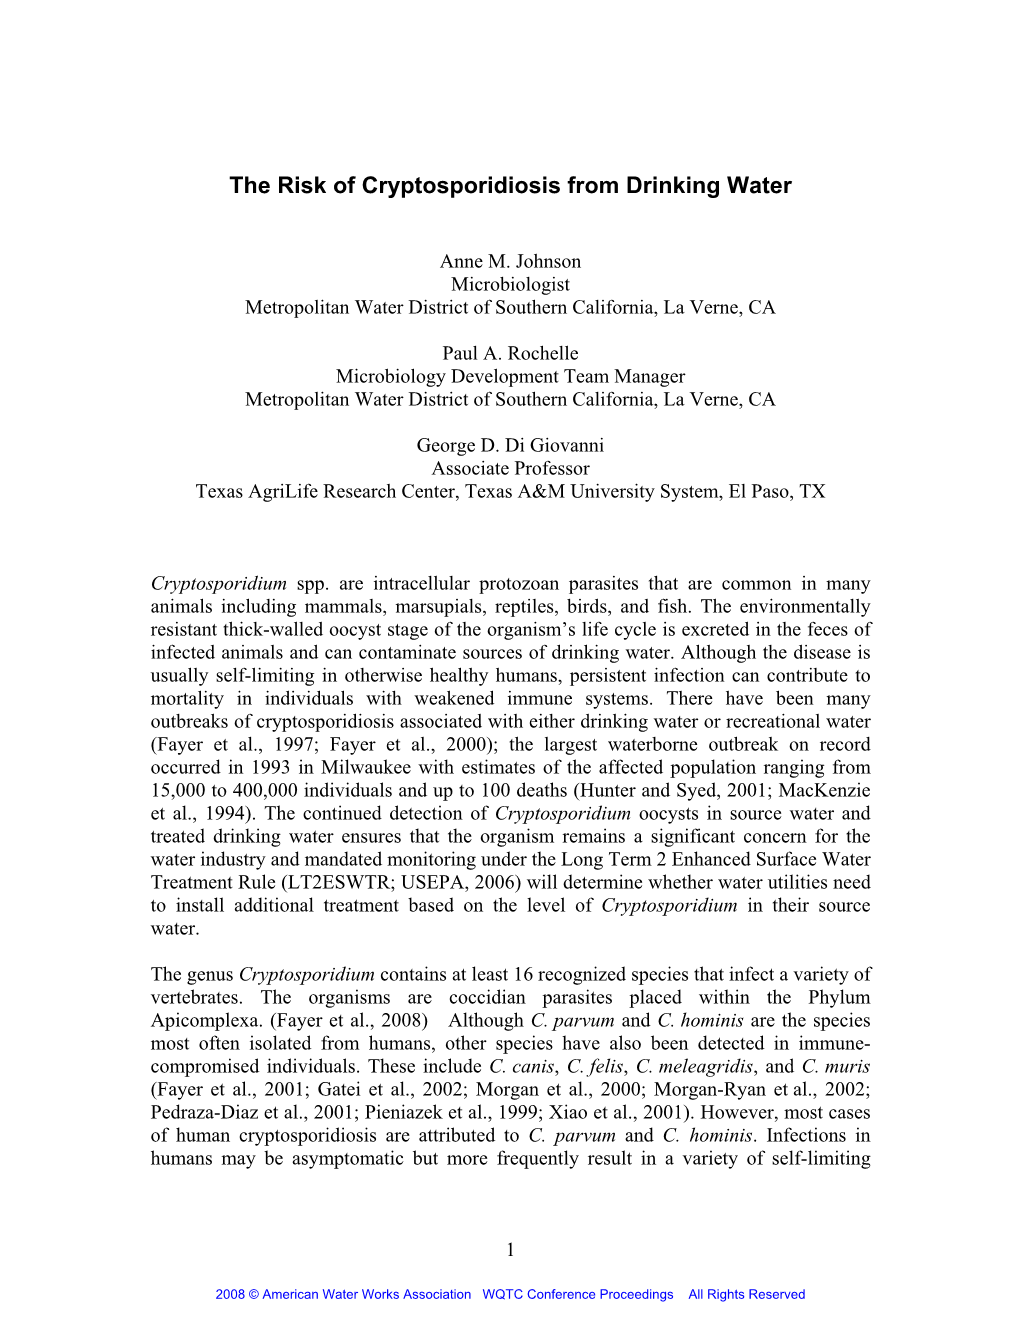 The Risk of Cryptosporidiosis from Drinking Water